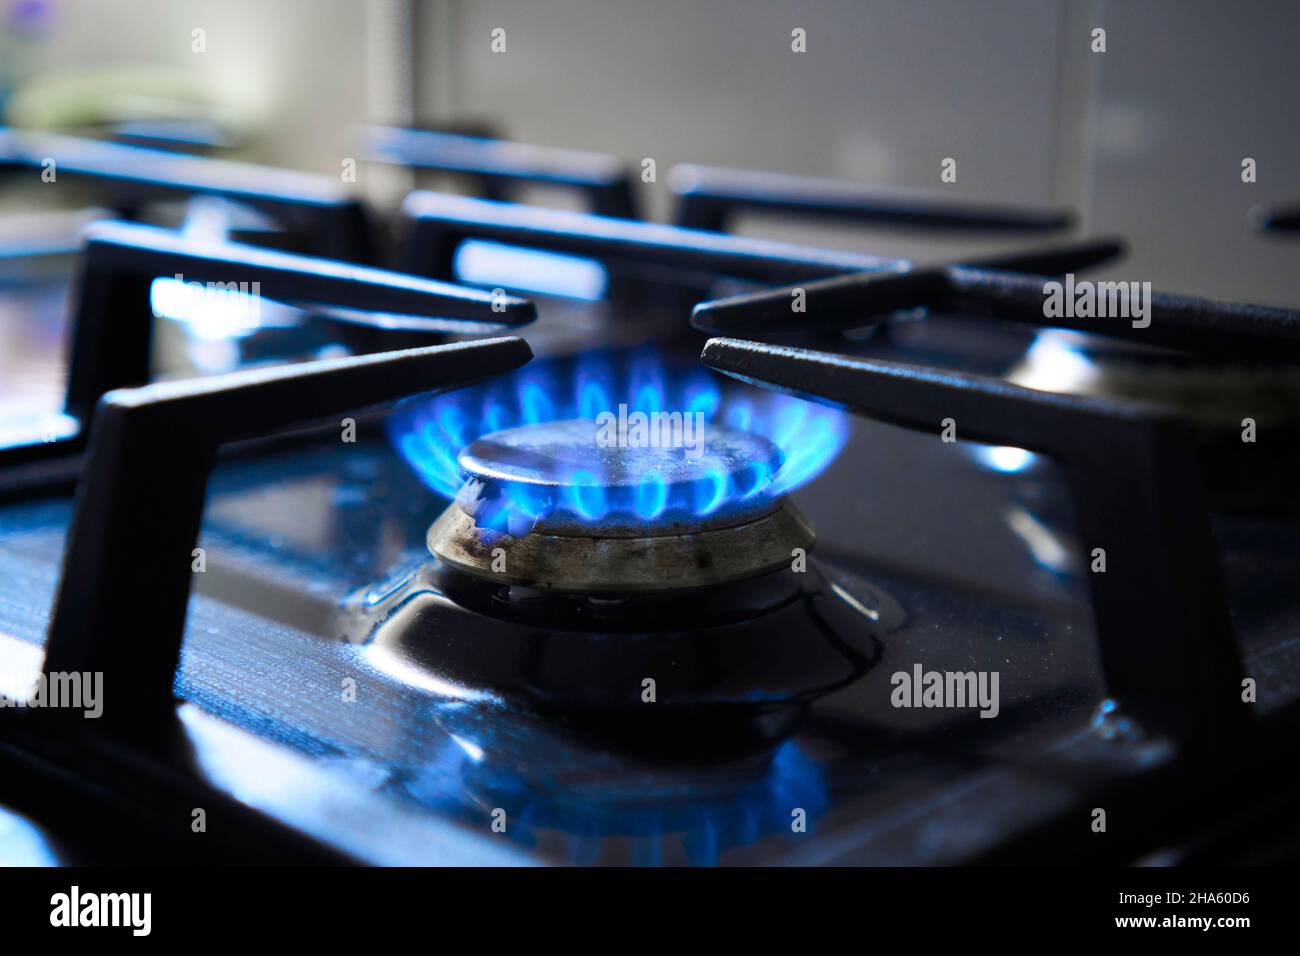 Blue flame from gas hob produce greenhouse gas emissions. Kitchen stove  grate on a burner fuelled by combustible natural gas or syngas, propane  Stock Photo - Alamy